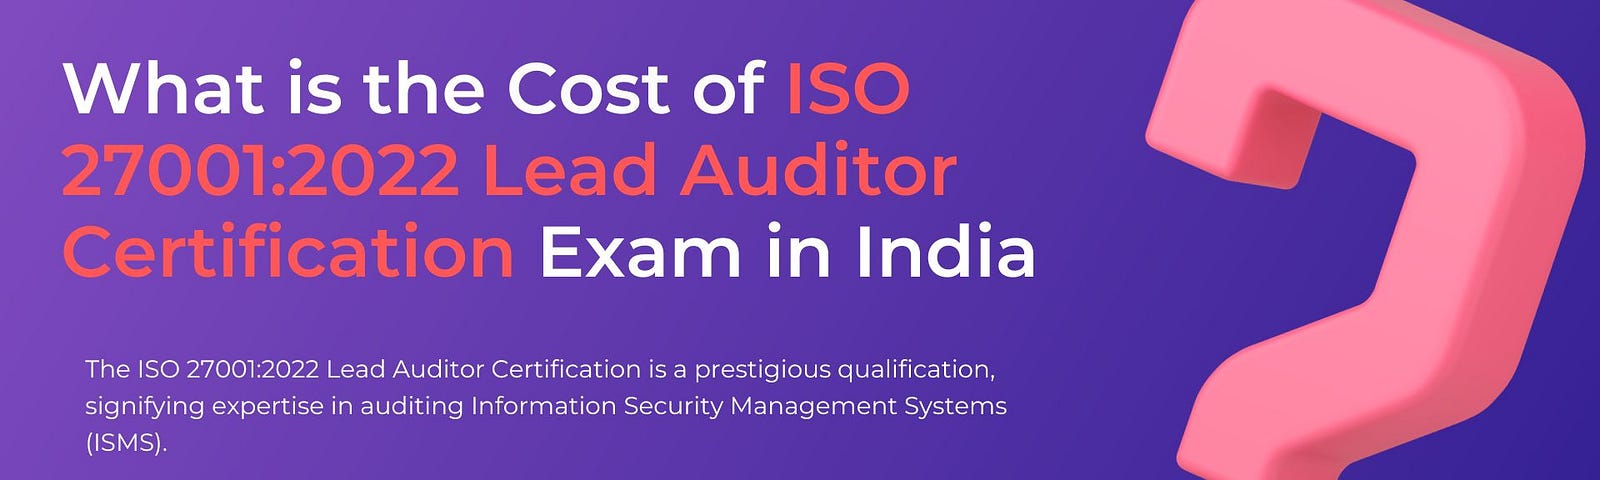 ISO 27001:2022 Lead Auditor Certification